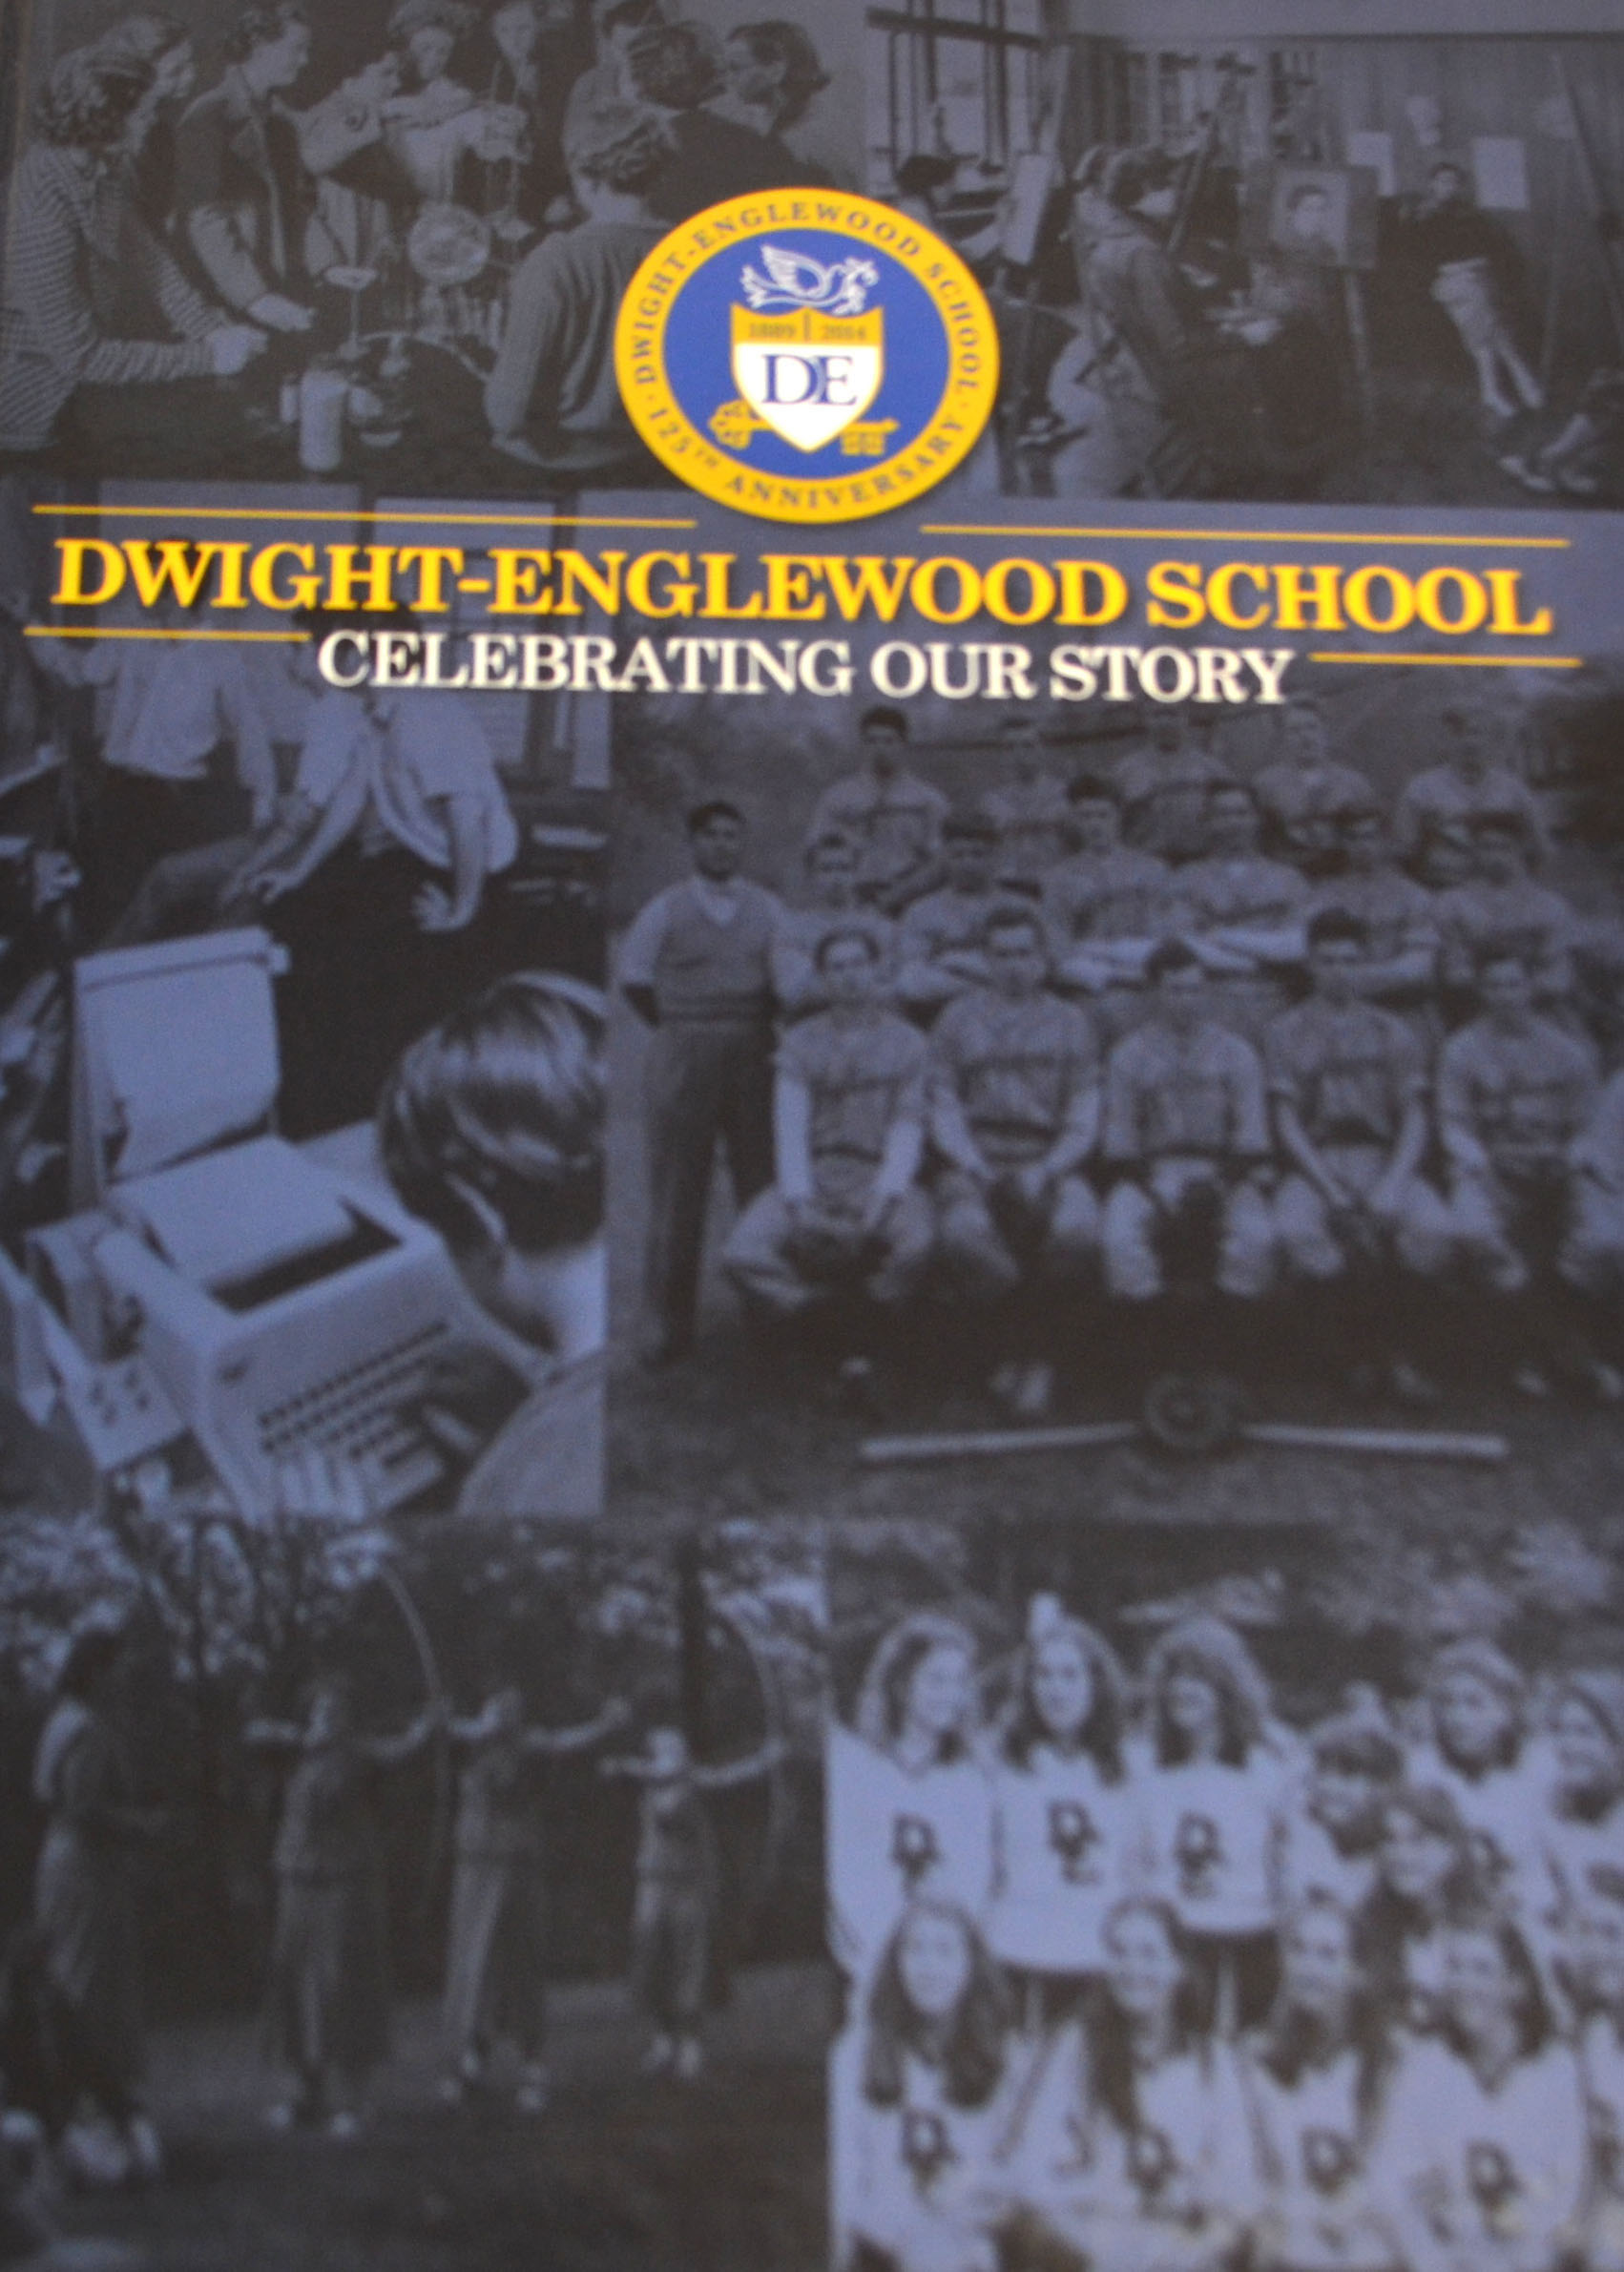 Dwight-Englewood School: Celebrating Our Story